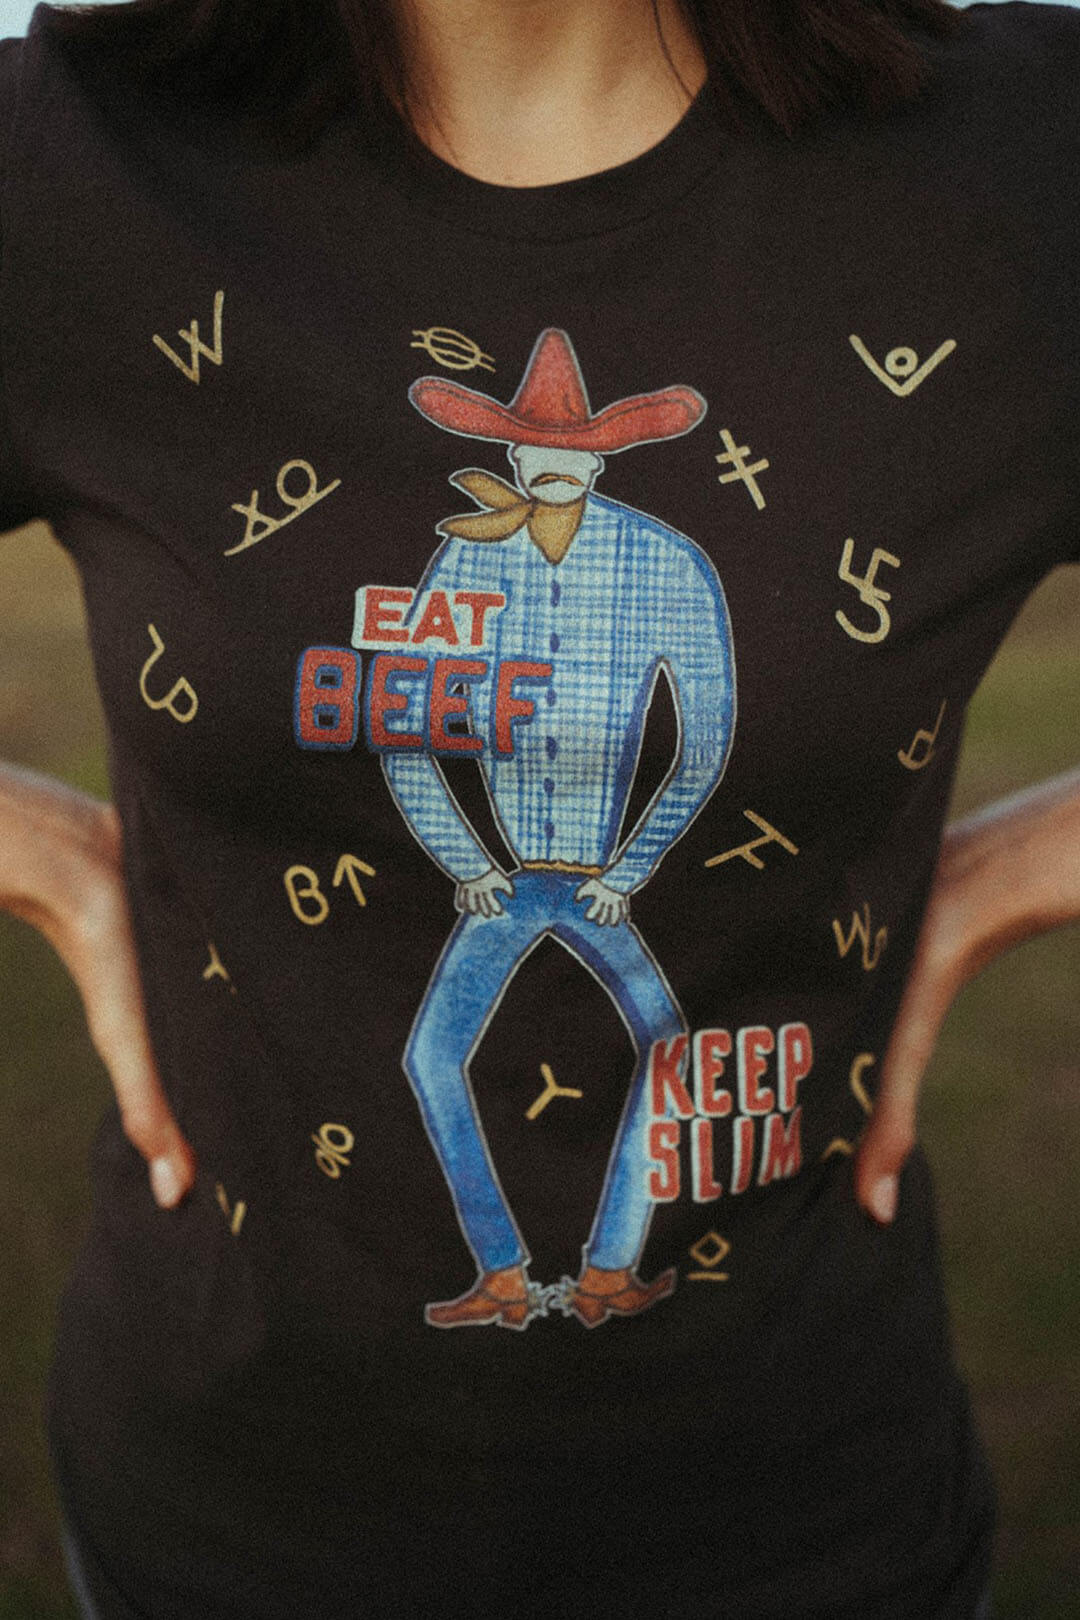 Close up picture of the XOXO art & company graphic tee featuring cow branding logos throughout and a cowboy with the saying "Eat Beef, Keep Slim"